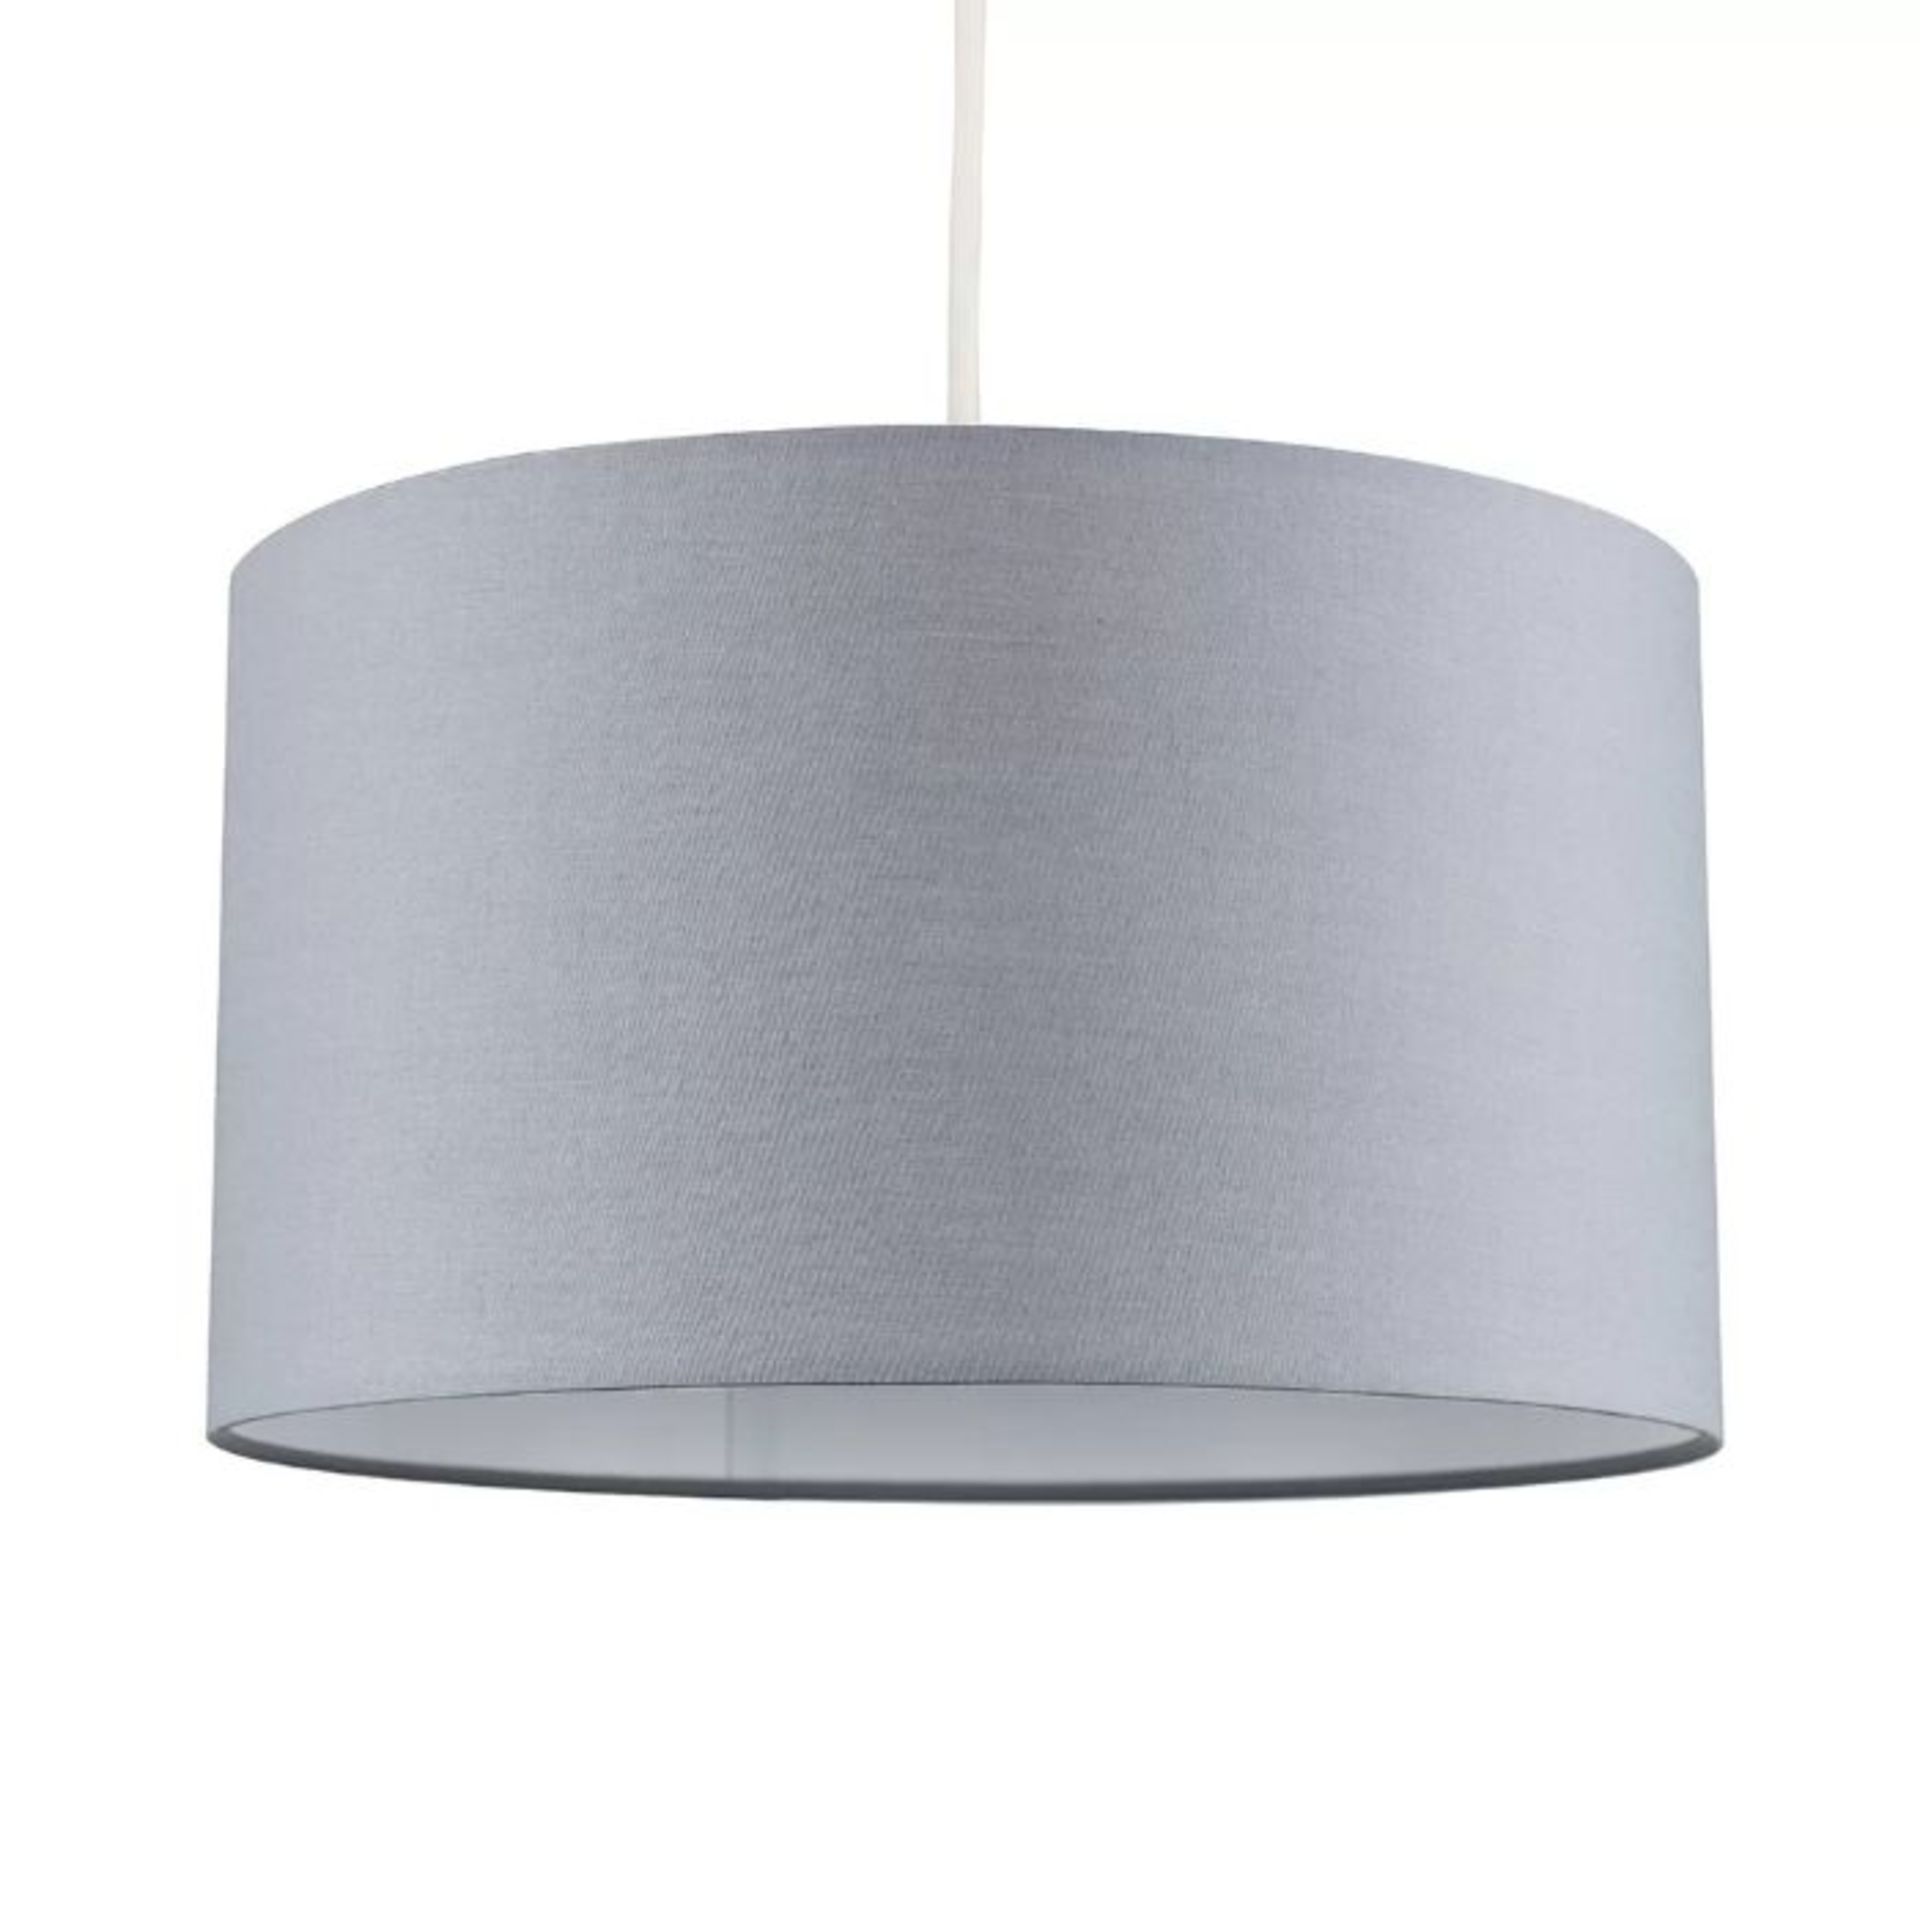 17 Stories, Set of 2 Textured Cotton 30cm Pendant Lightshades (GREY FINISH) - RRP £32.99 (FTCL2555 -